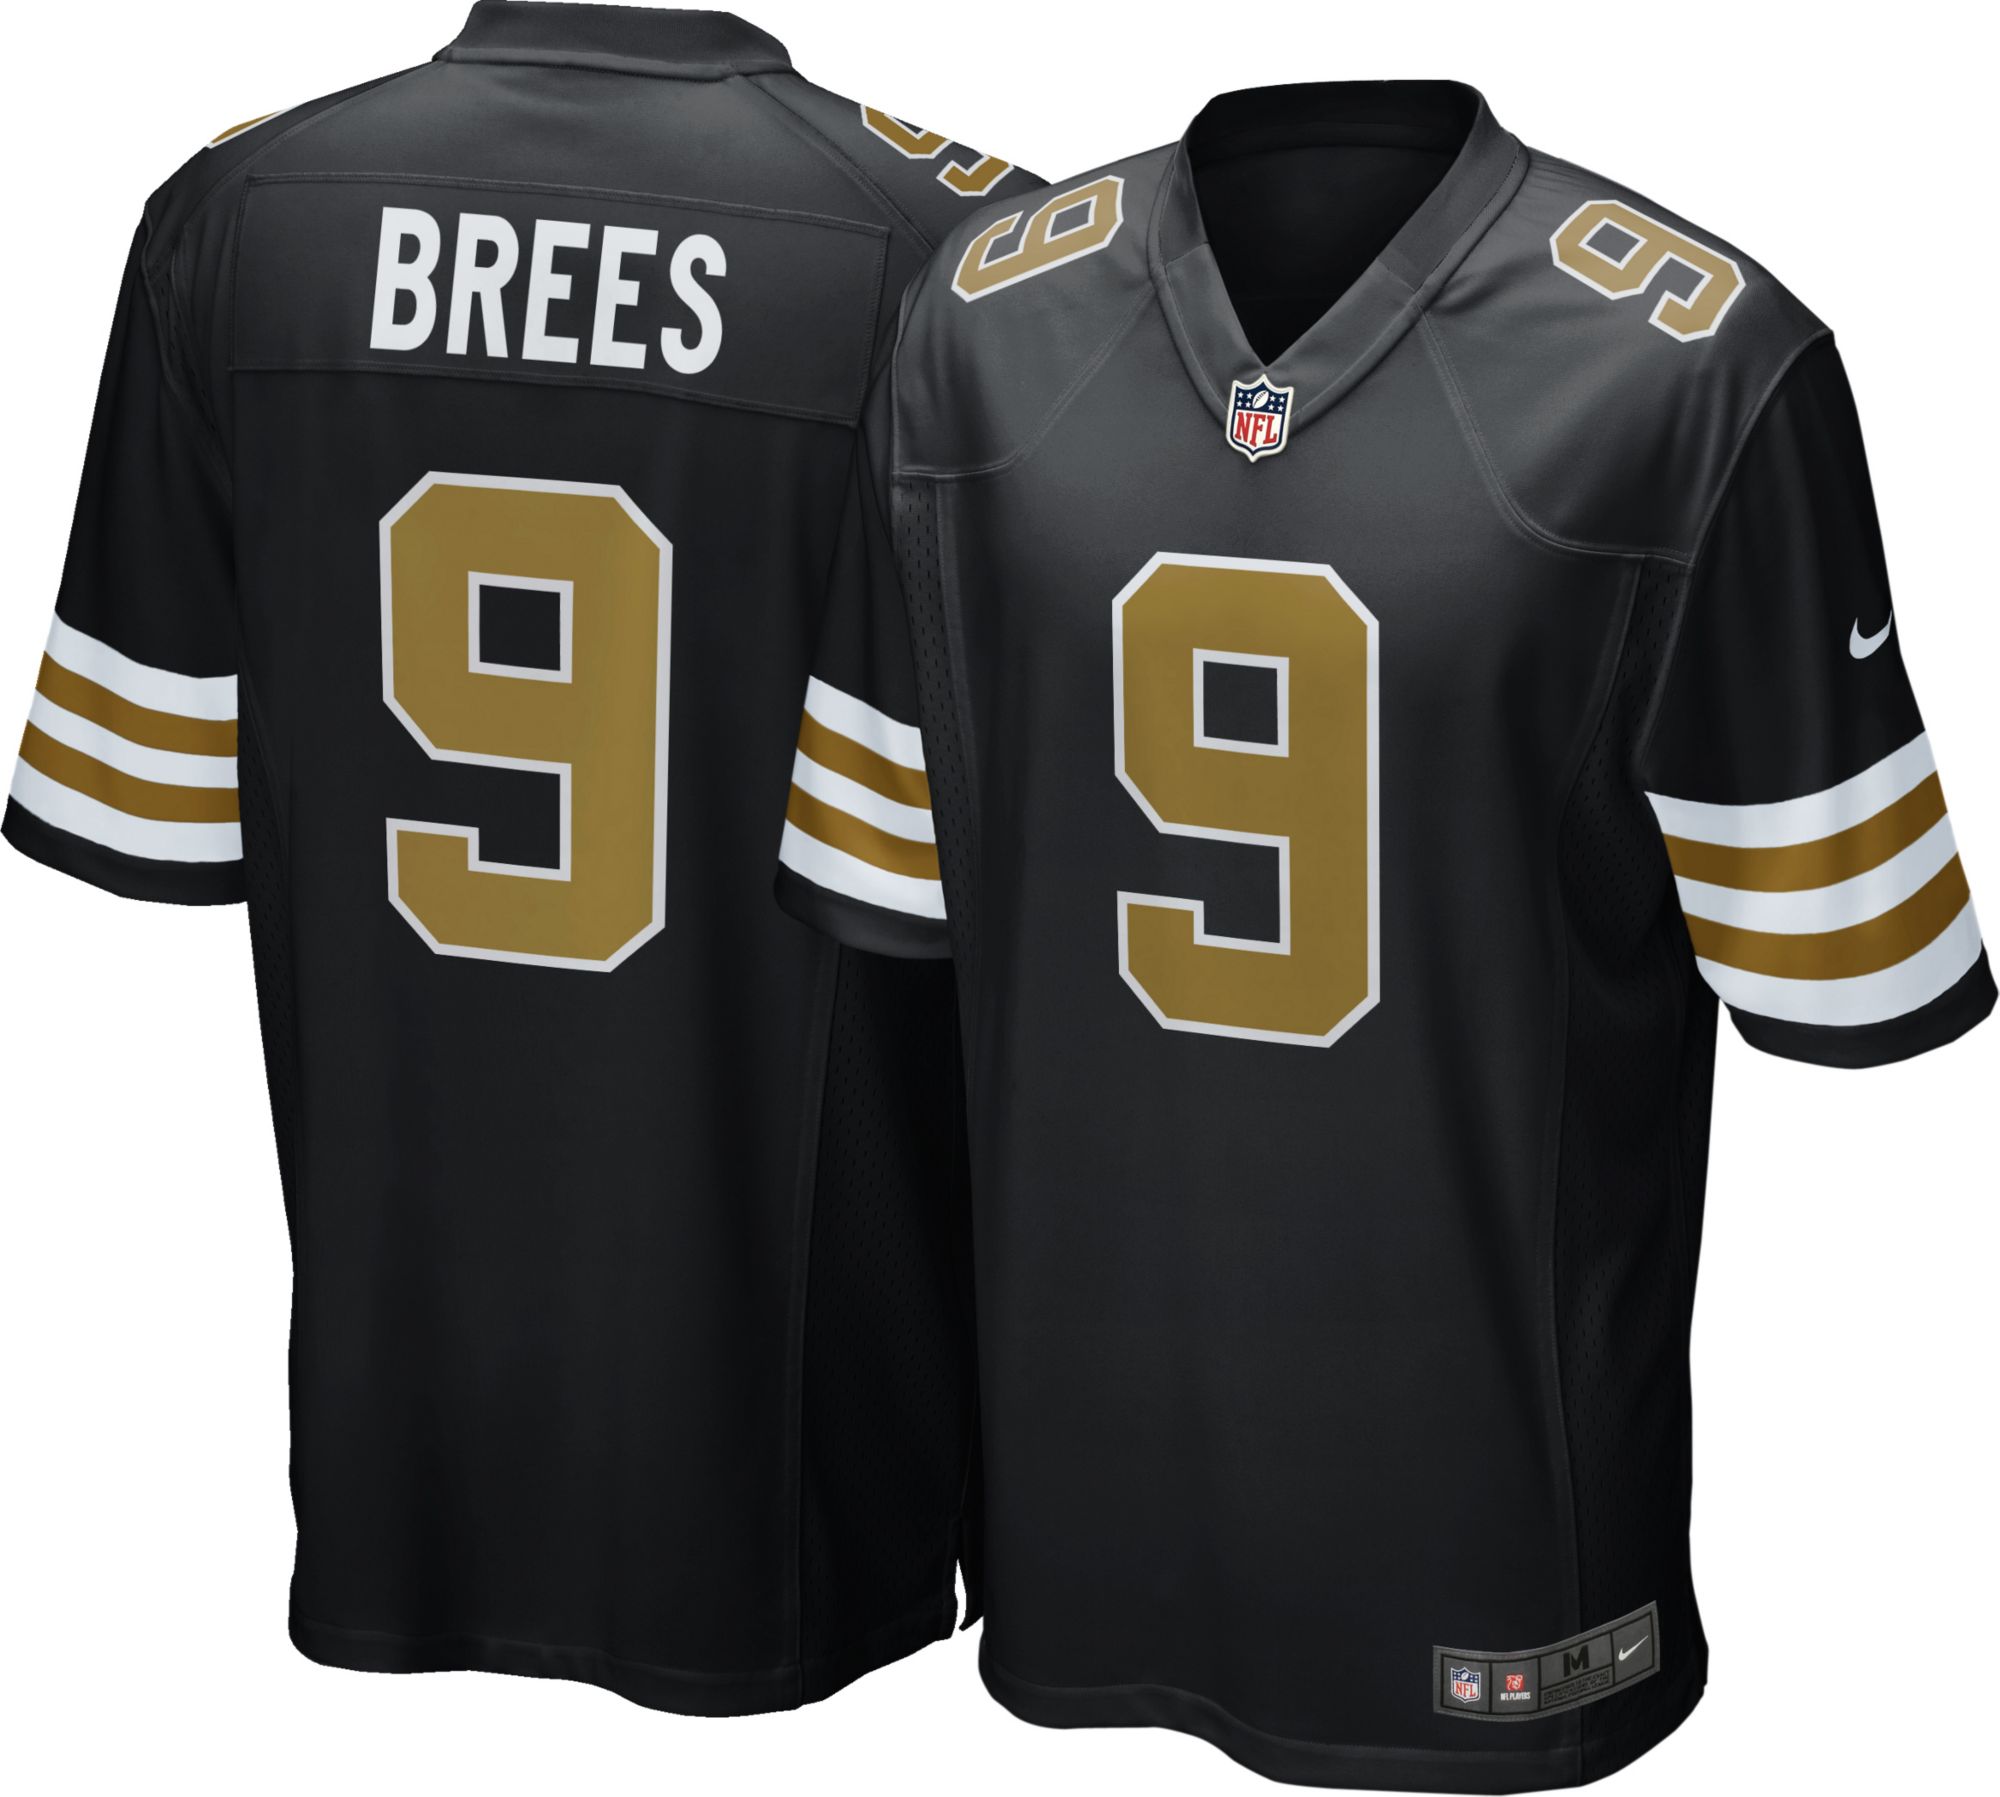 drew brees jersey for sale